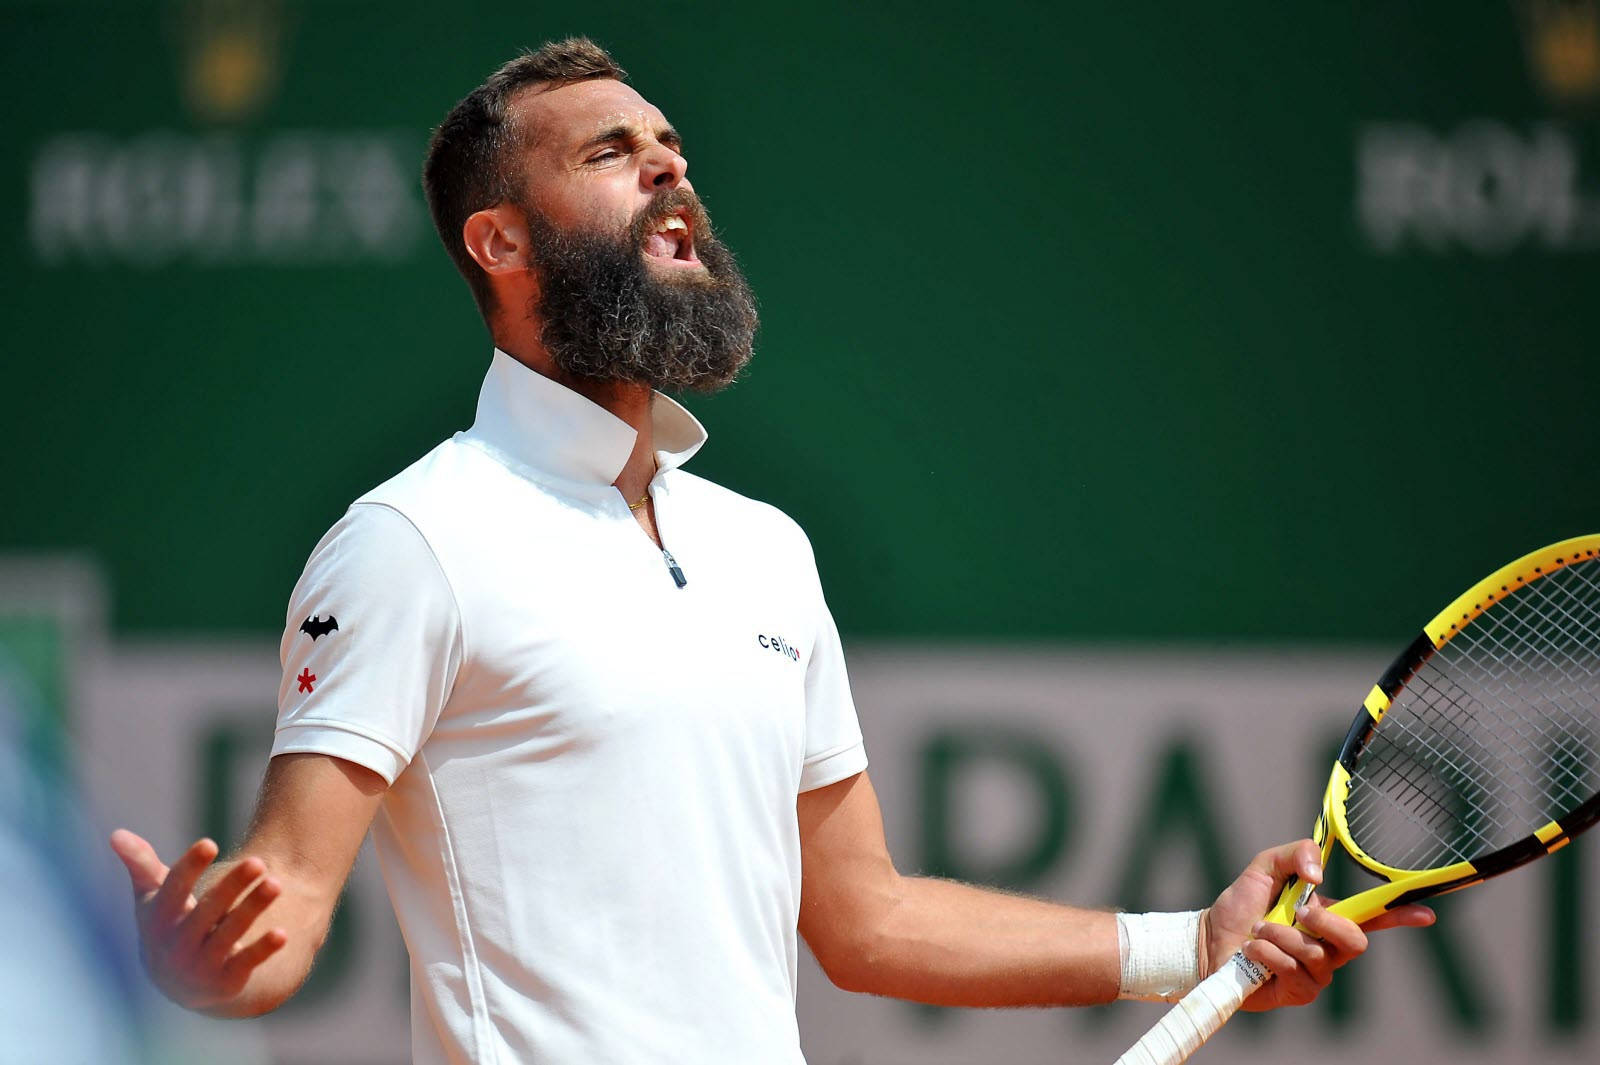 Benoit Paire Shouting With Arms Open Wallpaper